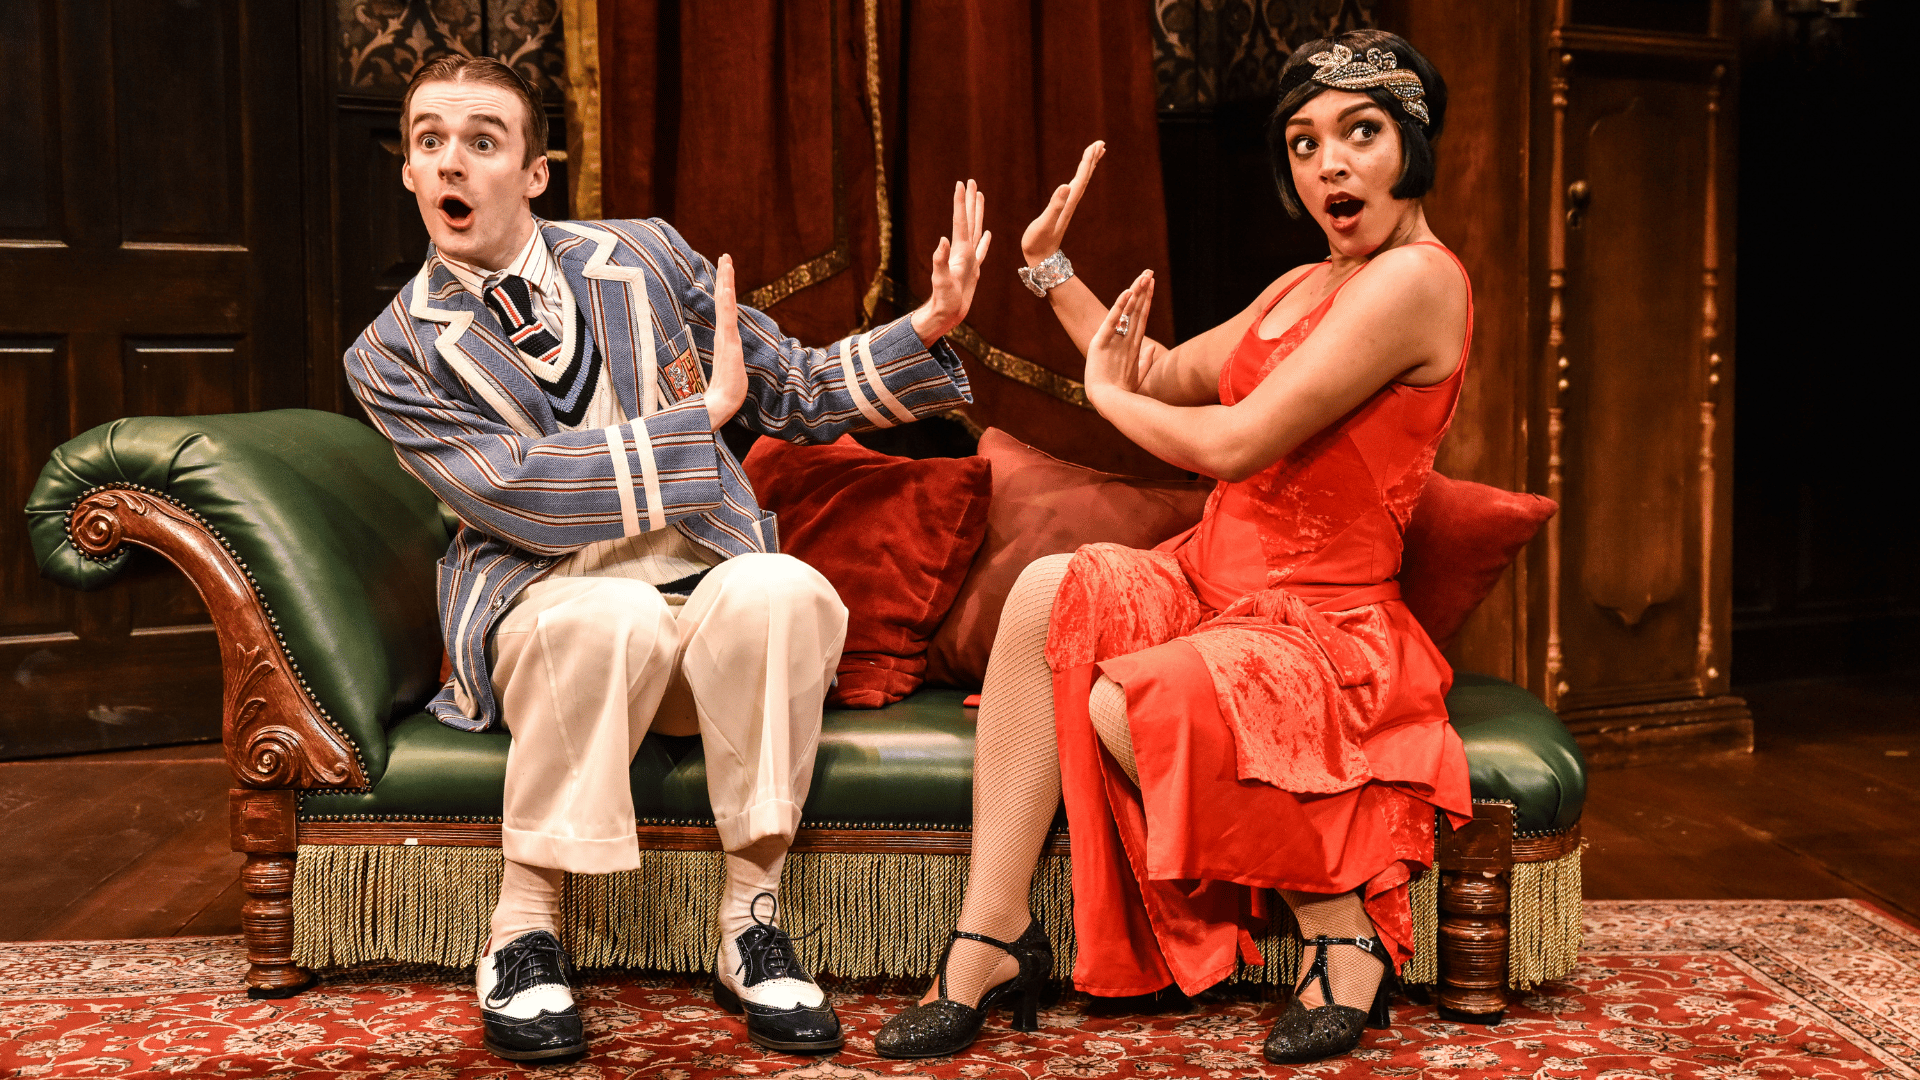 The Play That Goes Wrong Production Shot: Max (Tom Babbage) and Sandra (Laura White) are sat down on the chaise longue looking at the audience with a shocked face and their hands up as if they are pushing each other away.